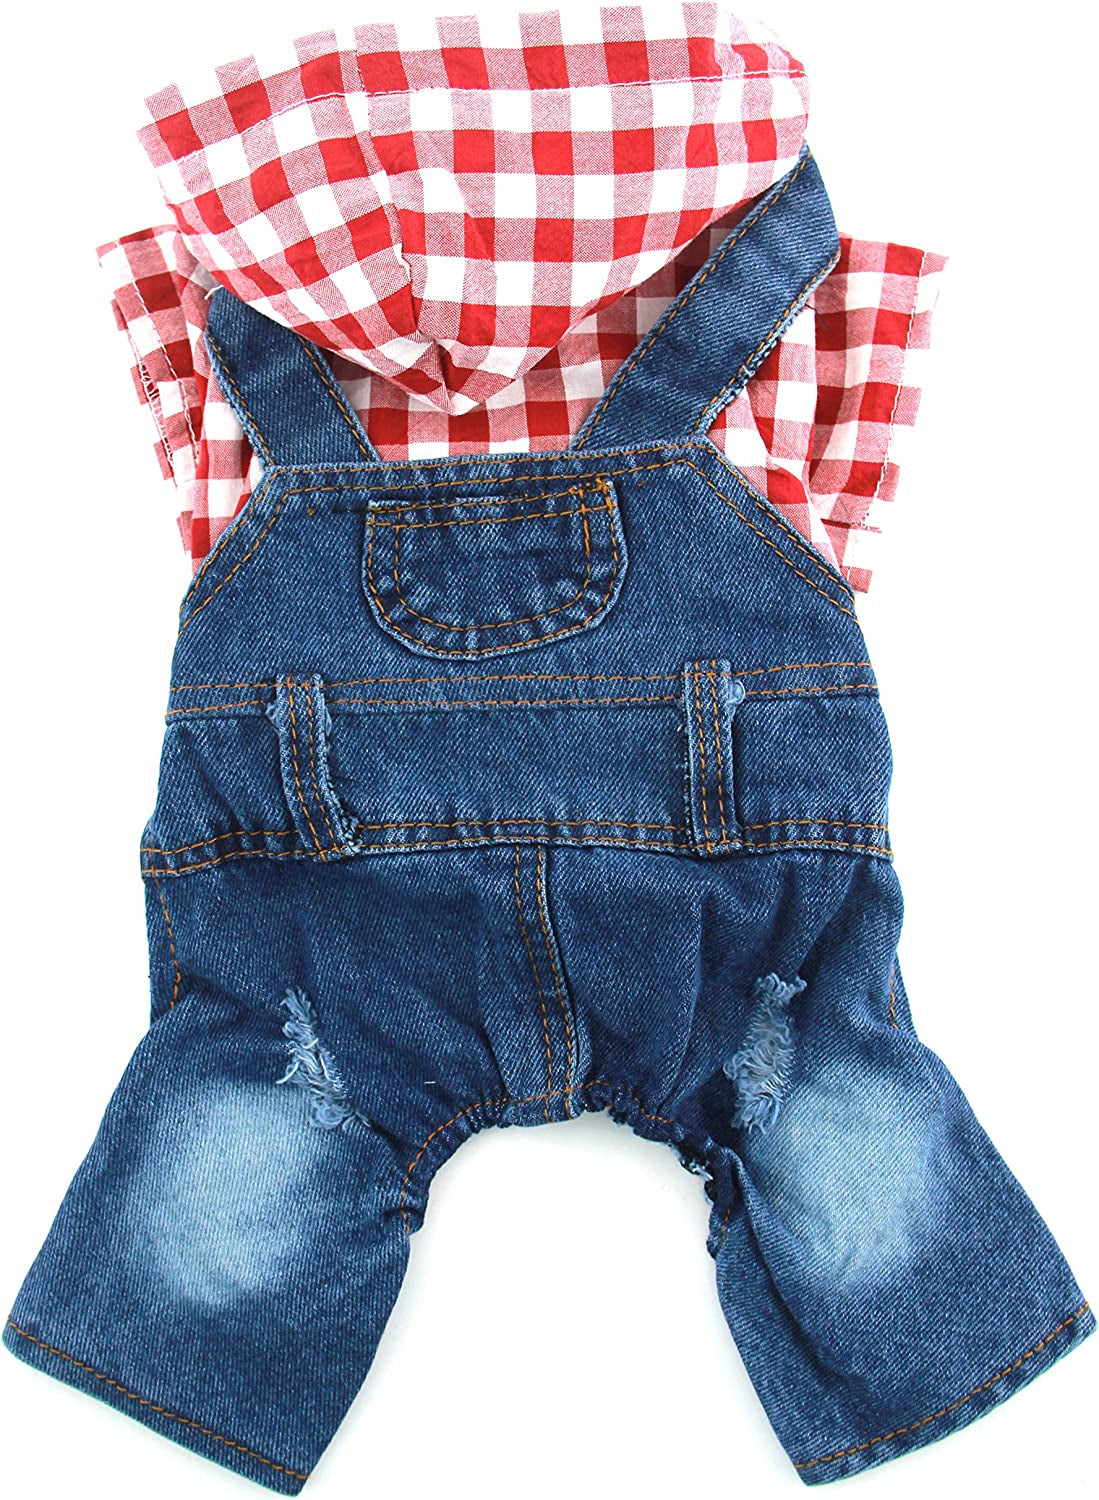 PETCARE Pet Dog Denim Jumpsuit Plaid Hoodies Puppy Overalls Doggy Jeans Jacket Clothes for Small Dogs Cats Chihuahua Yorkie Spring Summer Costume Outfit Animals & Pet Supplies > Pet Supplies > Dog Supplies > Dog Apparel Yi Wu Shi Jia Chong Dian Zi Shang Wu Shang Hang Red L(Suggest 9-11 lbs) 